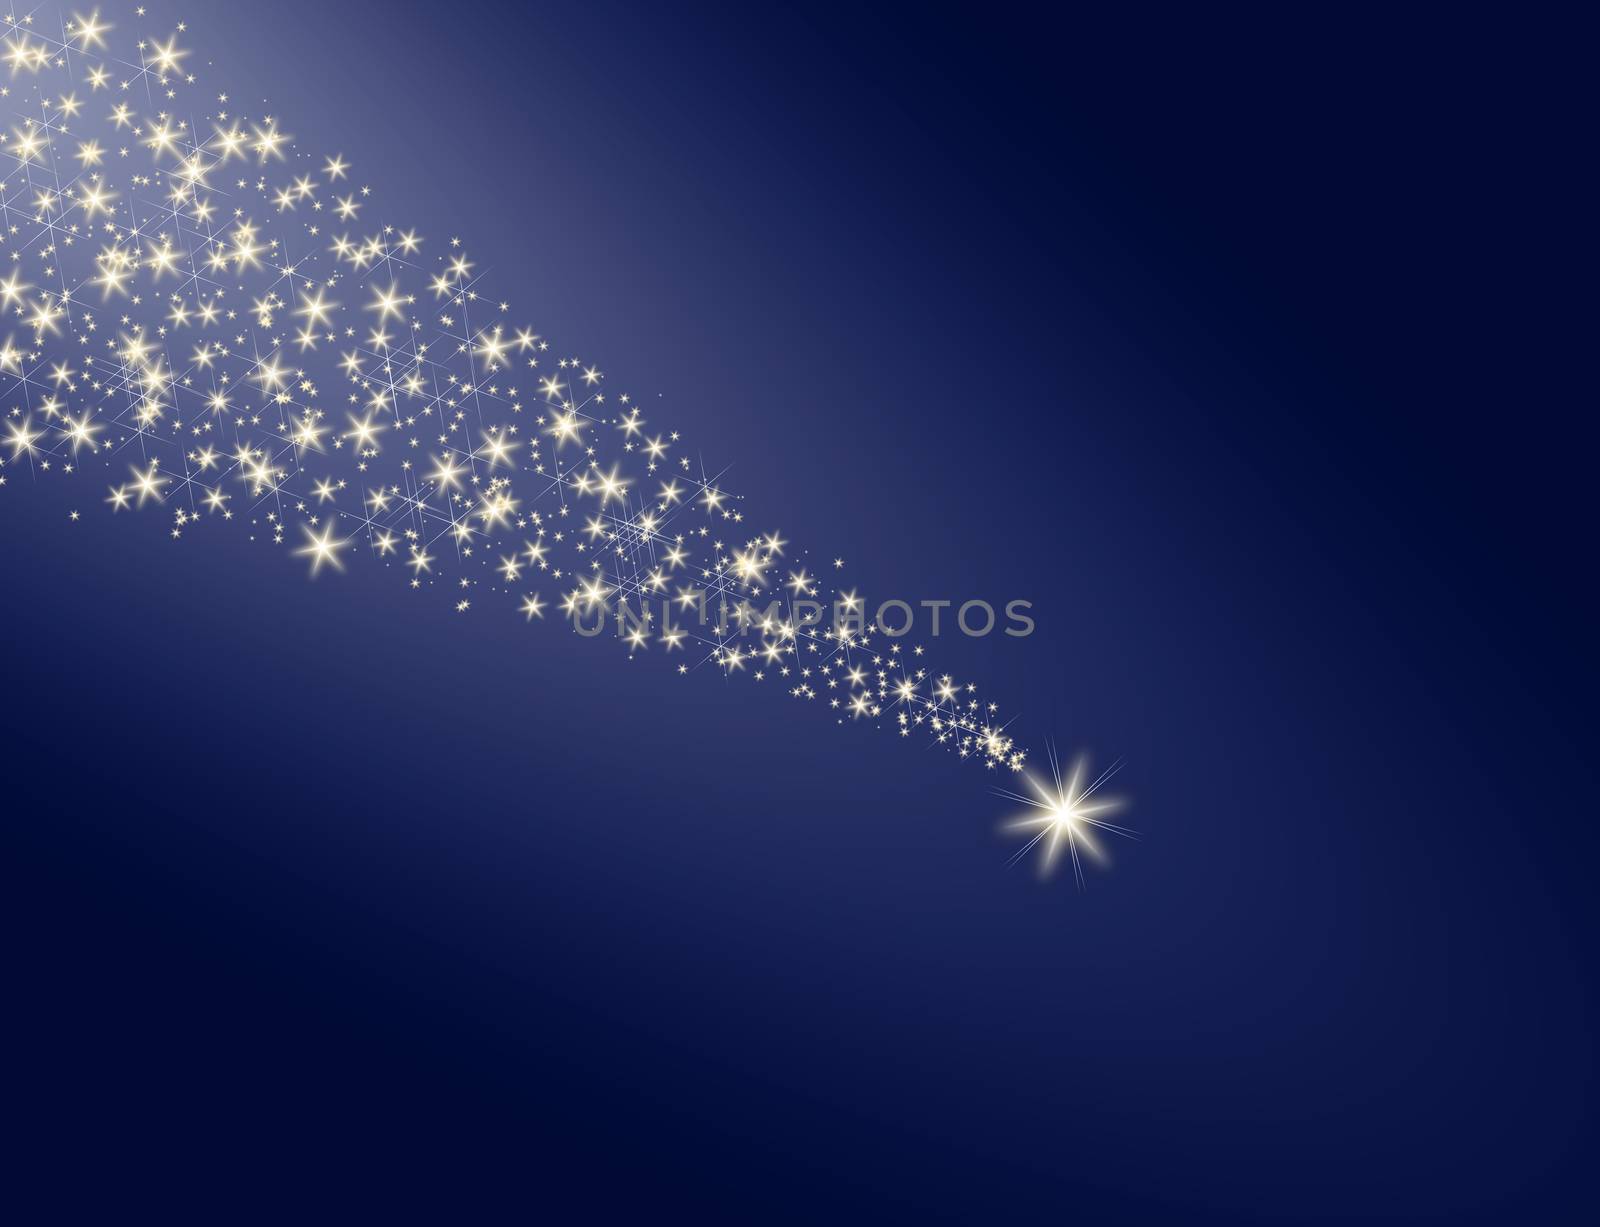 Falling star on a blue background with a white trail